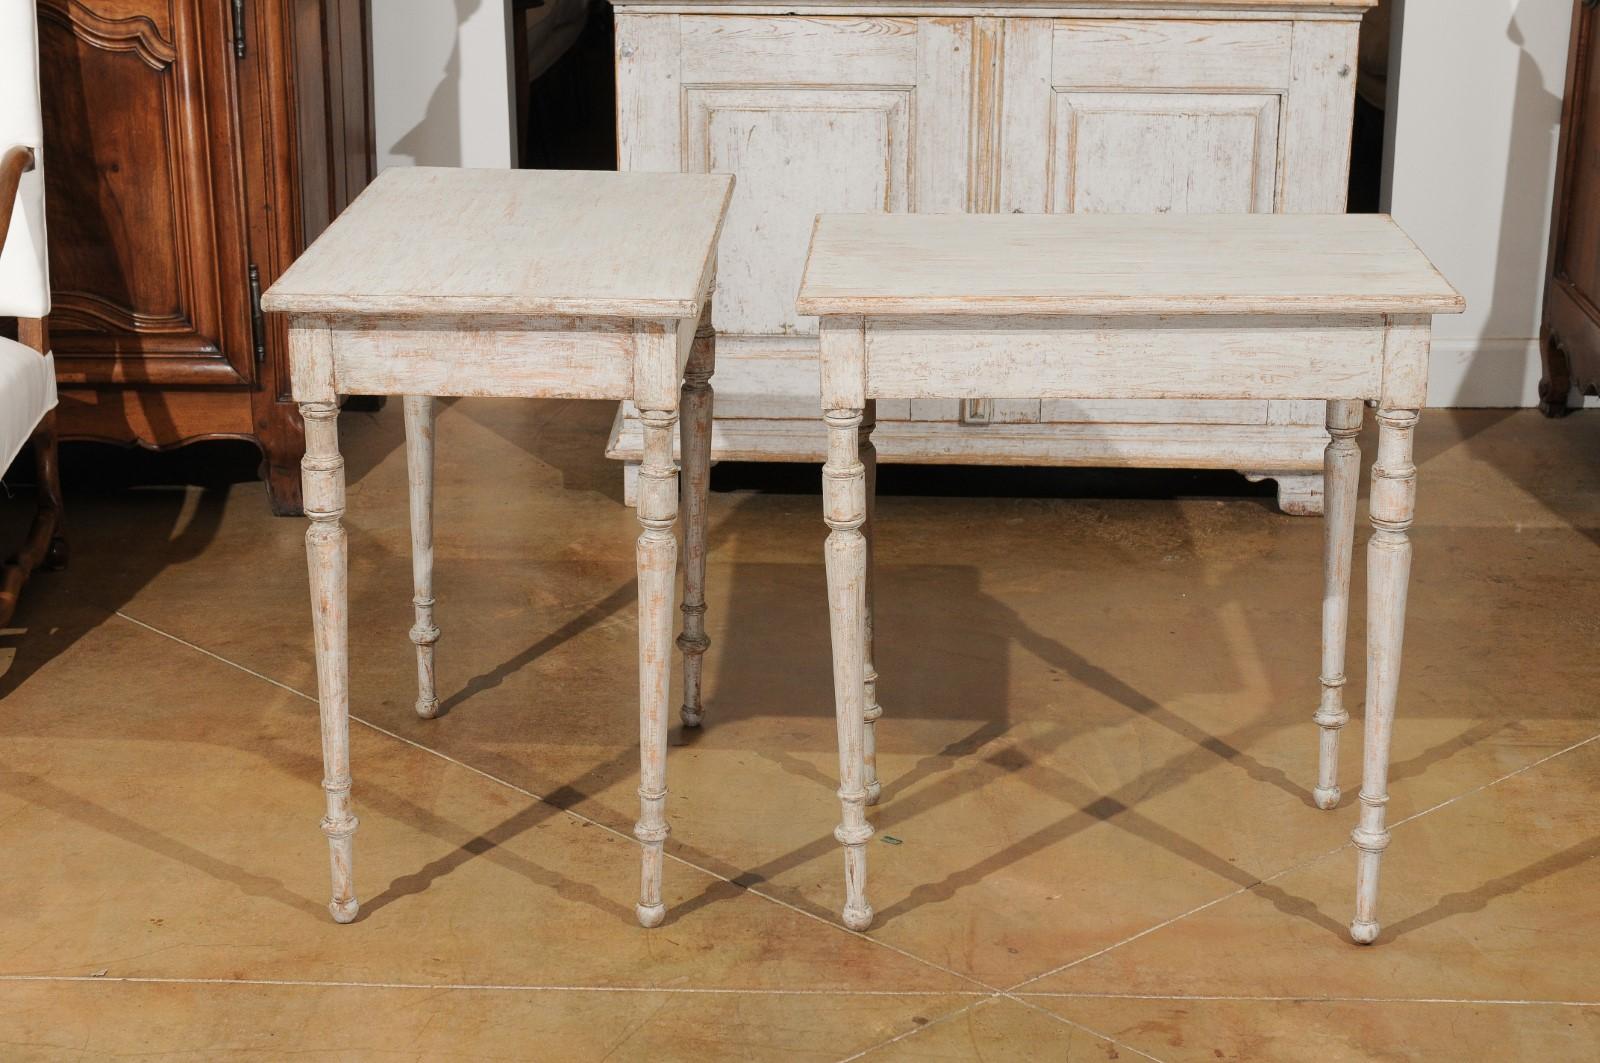 Pair of Swedish 19th Century Tables with Turned Legs and Distressed Finish 3